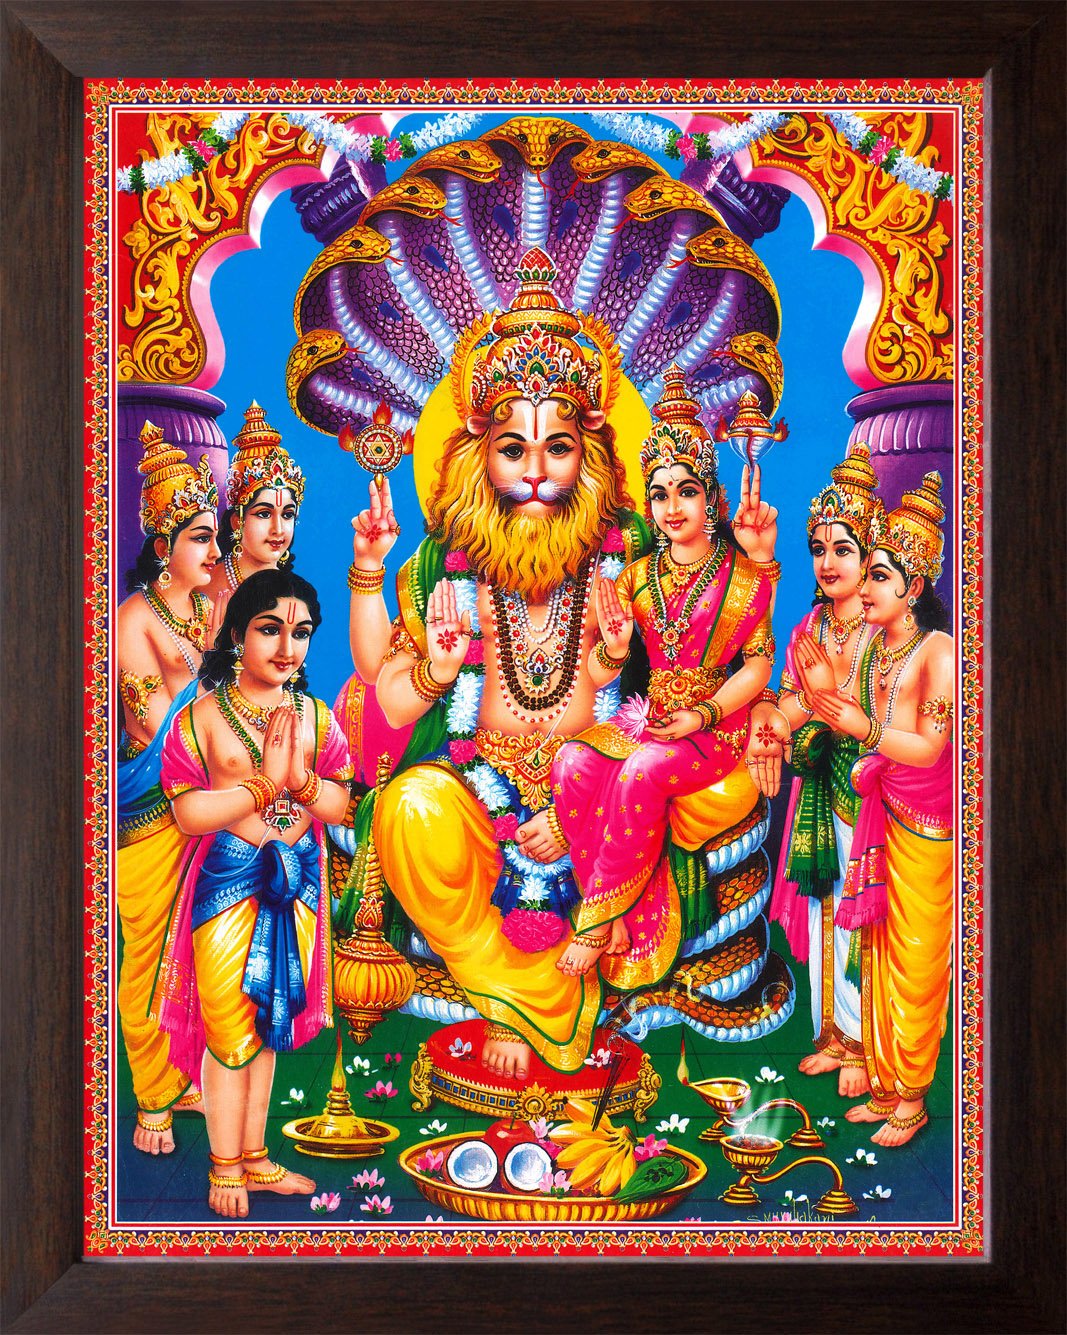 Art N Store Lord Narsingh With Sheshnaag HD Printed Picture Religious And Decor Poster Painting With Synthetic Brown Frame (30 X 23.5 X 1.5 Cm, Acrylic Sheet), Amazon.in: Home & Kitchen